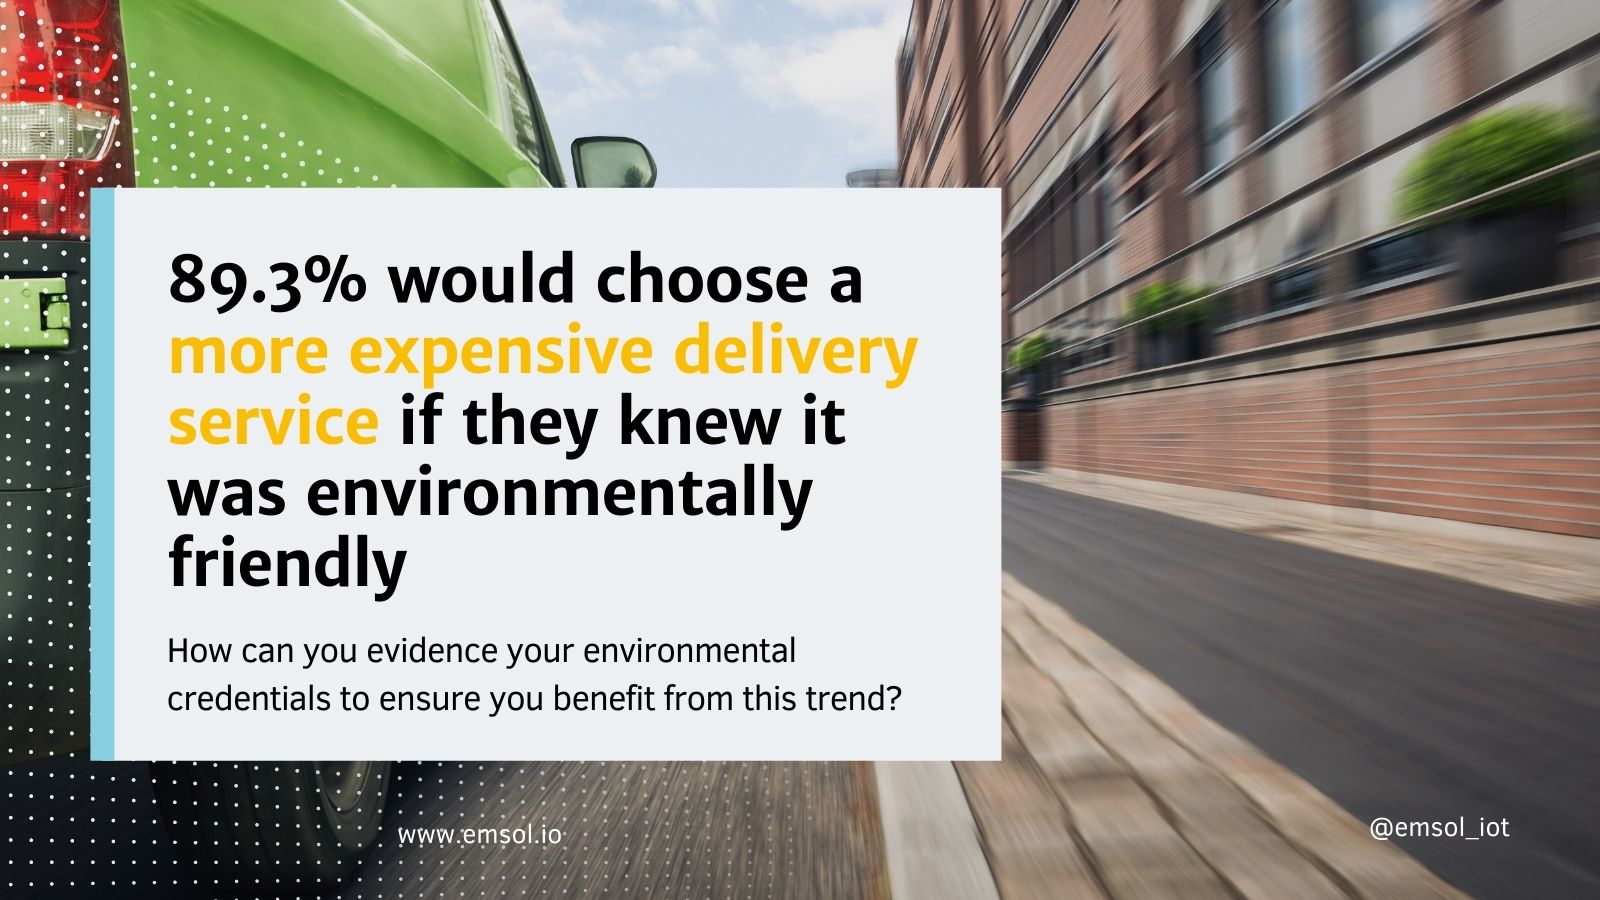 Green deliveries – why retail should consider supply chain pollution